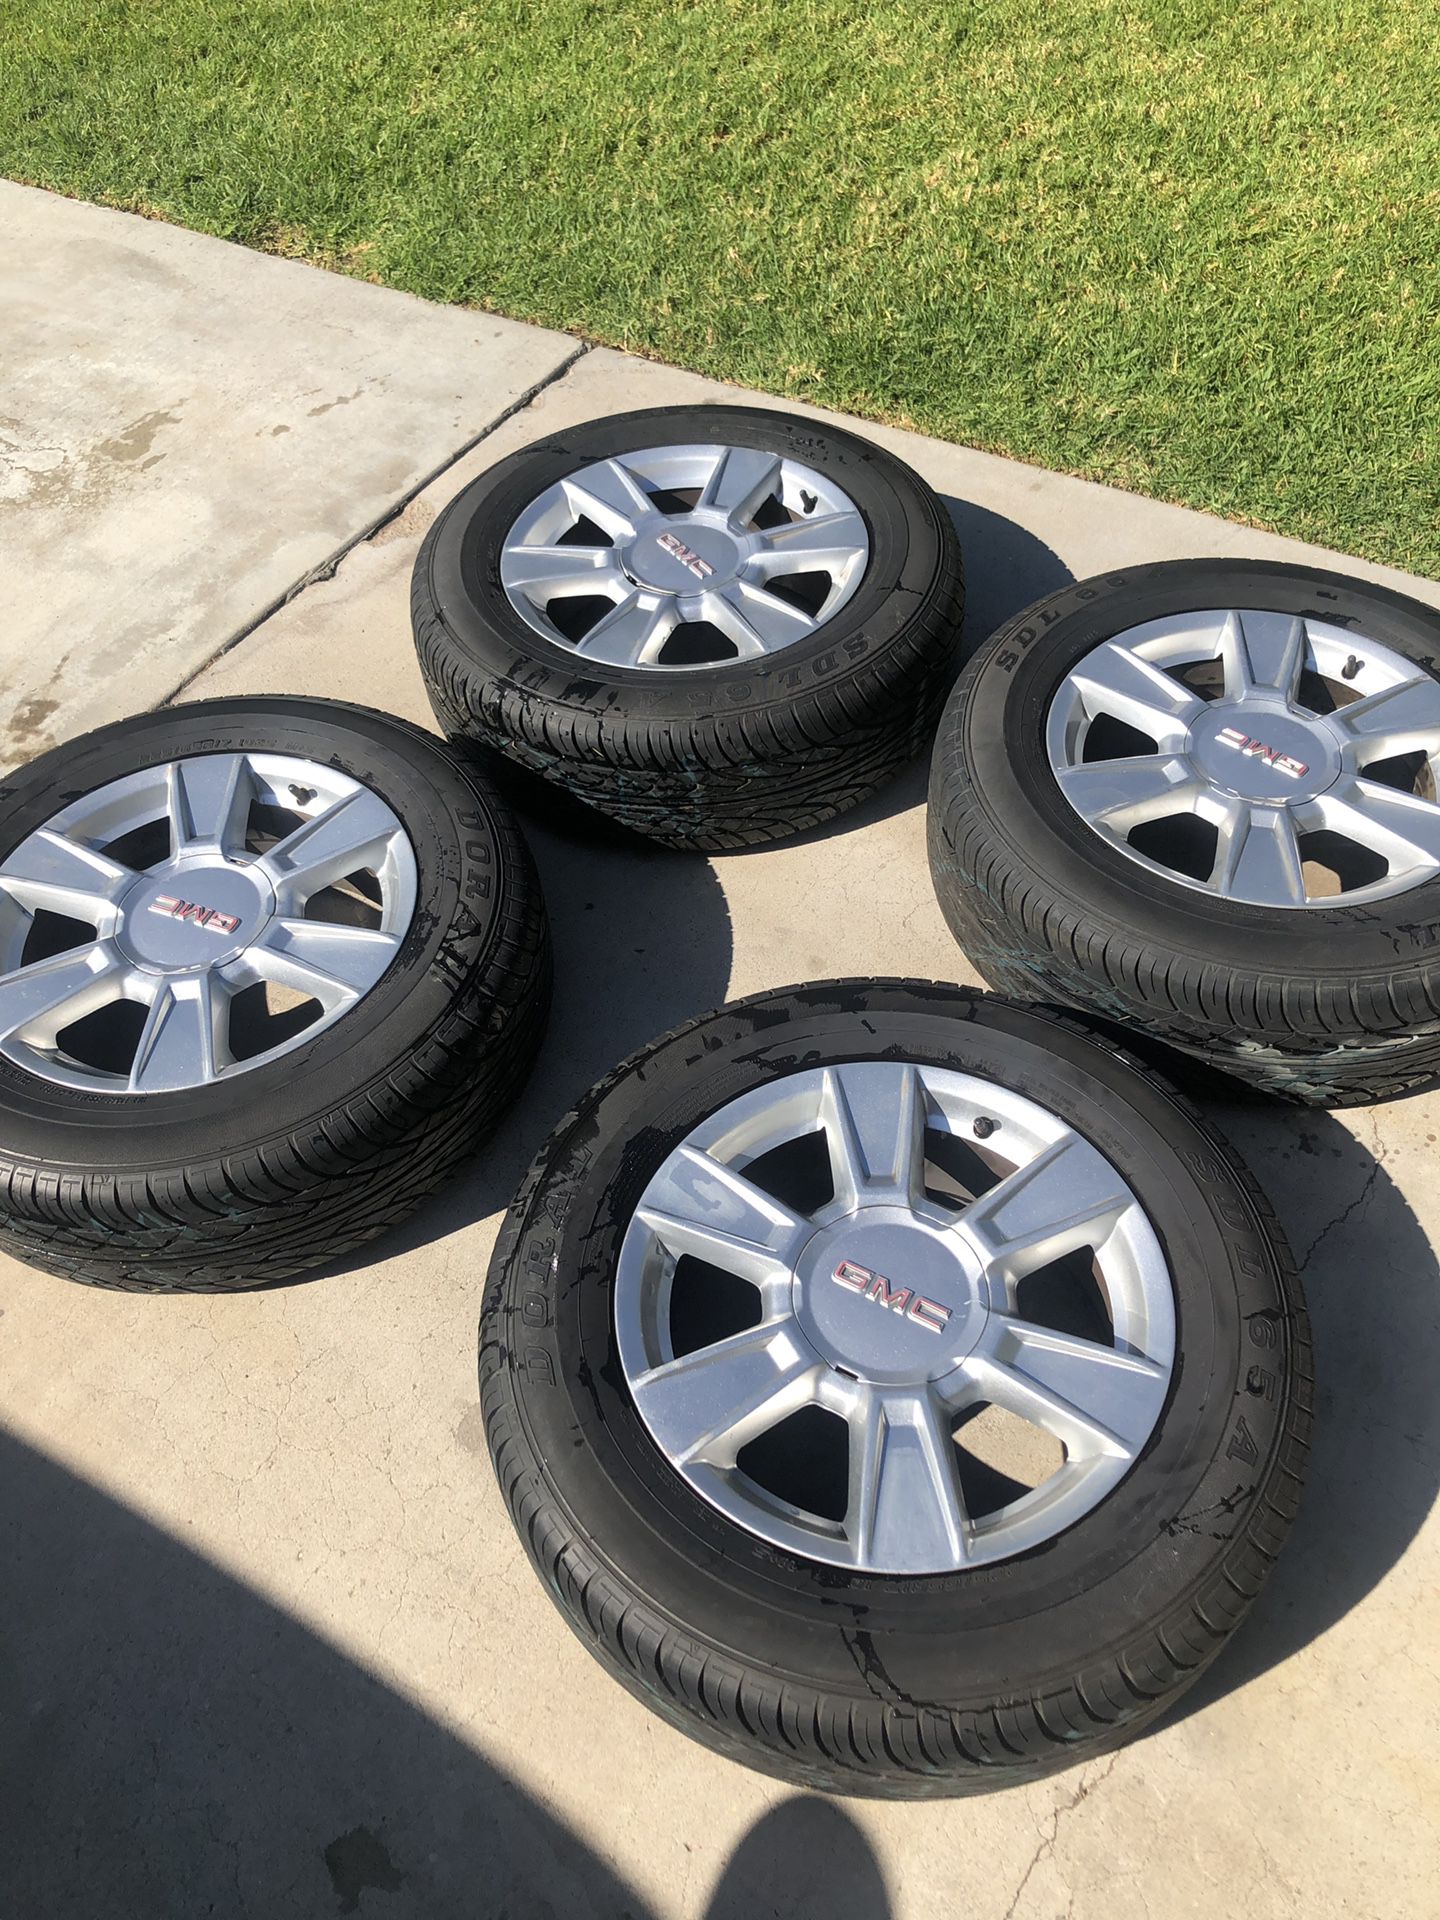 4 Doral 225/65R17 1025 tires with GMC rims